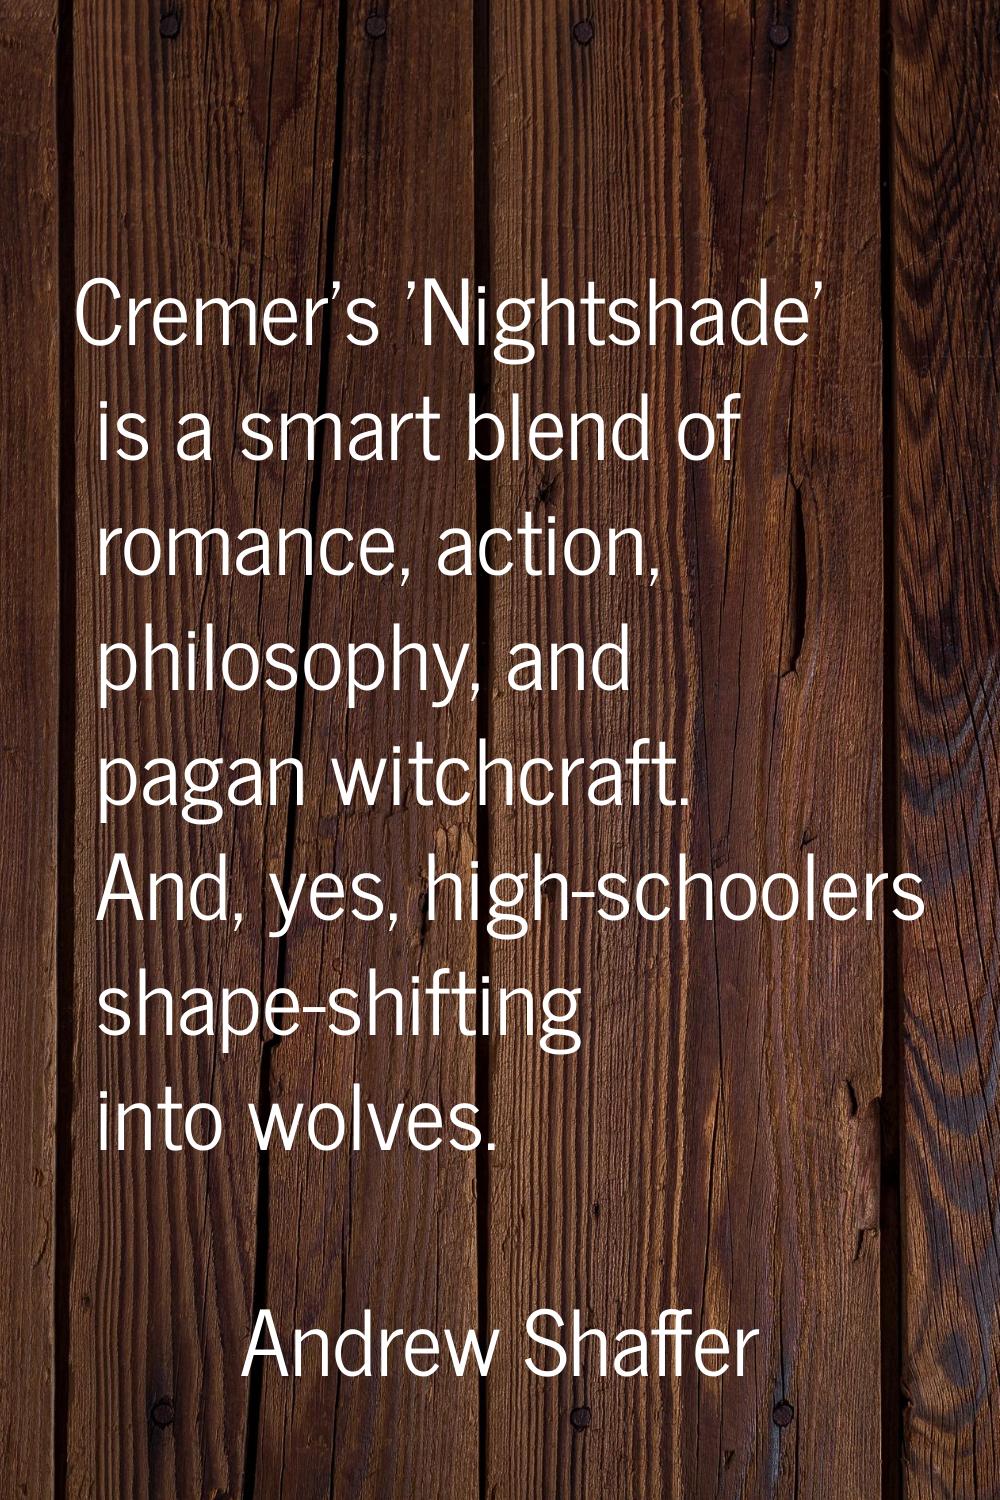 Cremer's 'Nightshade' is a smart blend of romance, action, philosophy, and pagan witchcraft. And, y